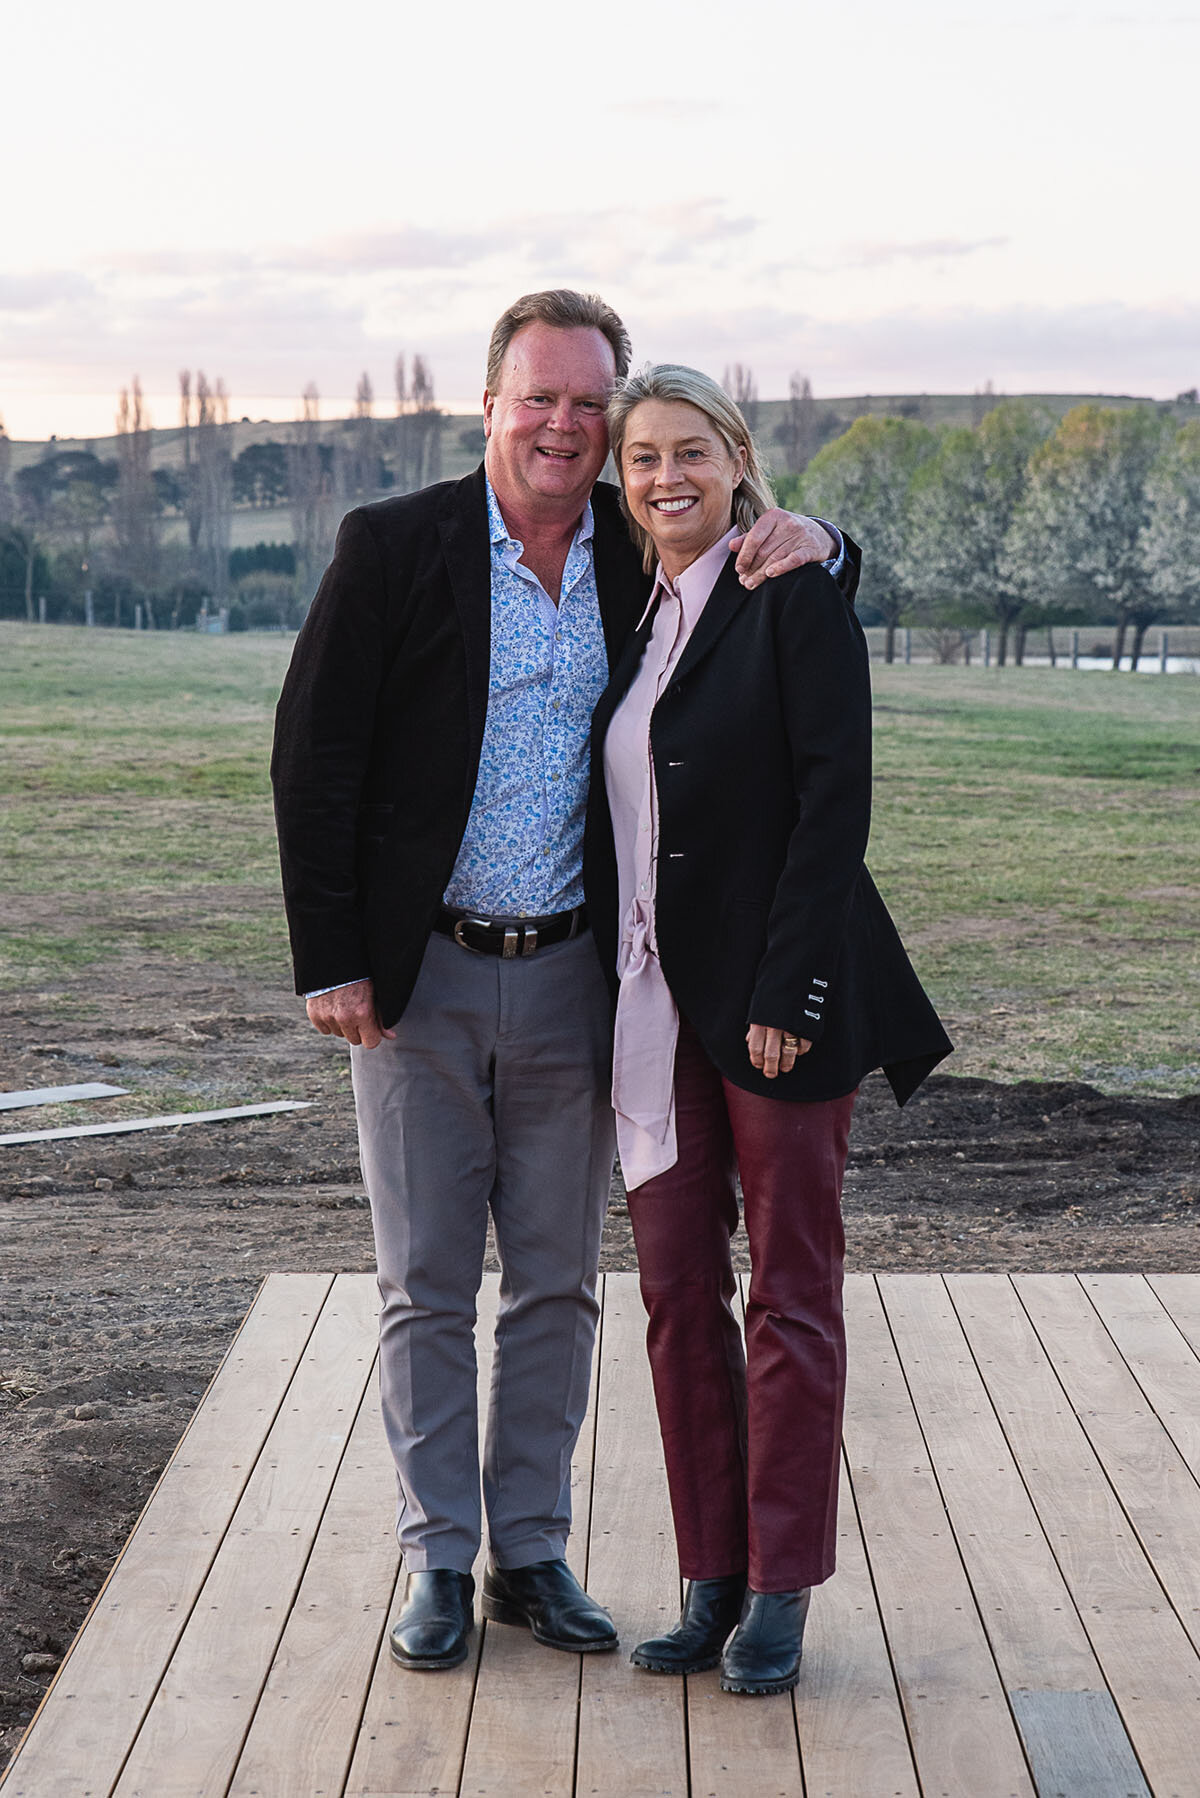 Mona Farm Owners Bill and Belinda Pulver